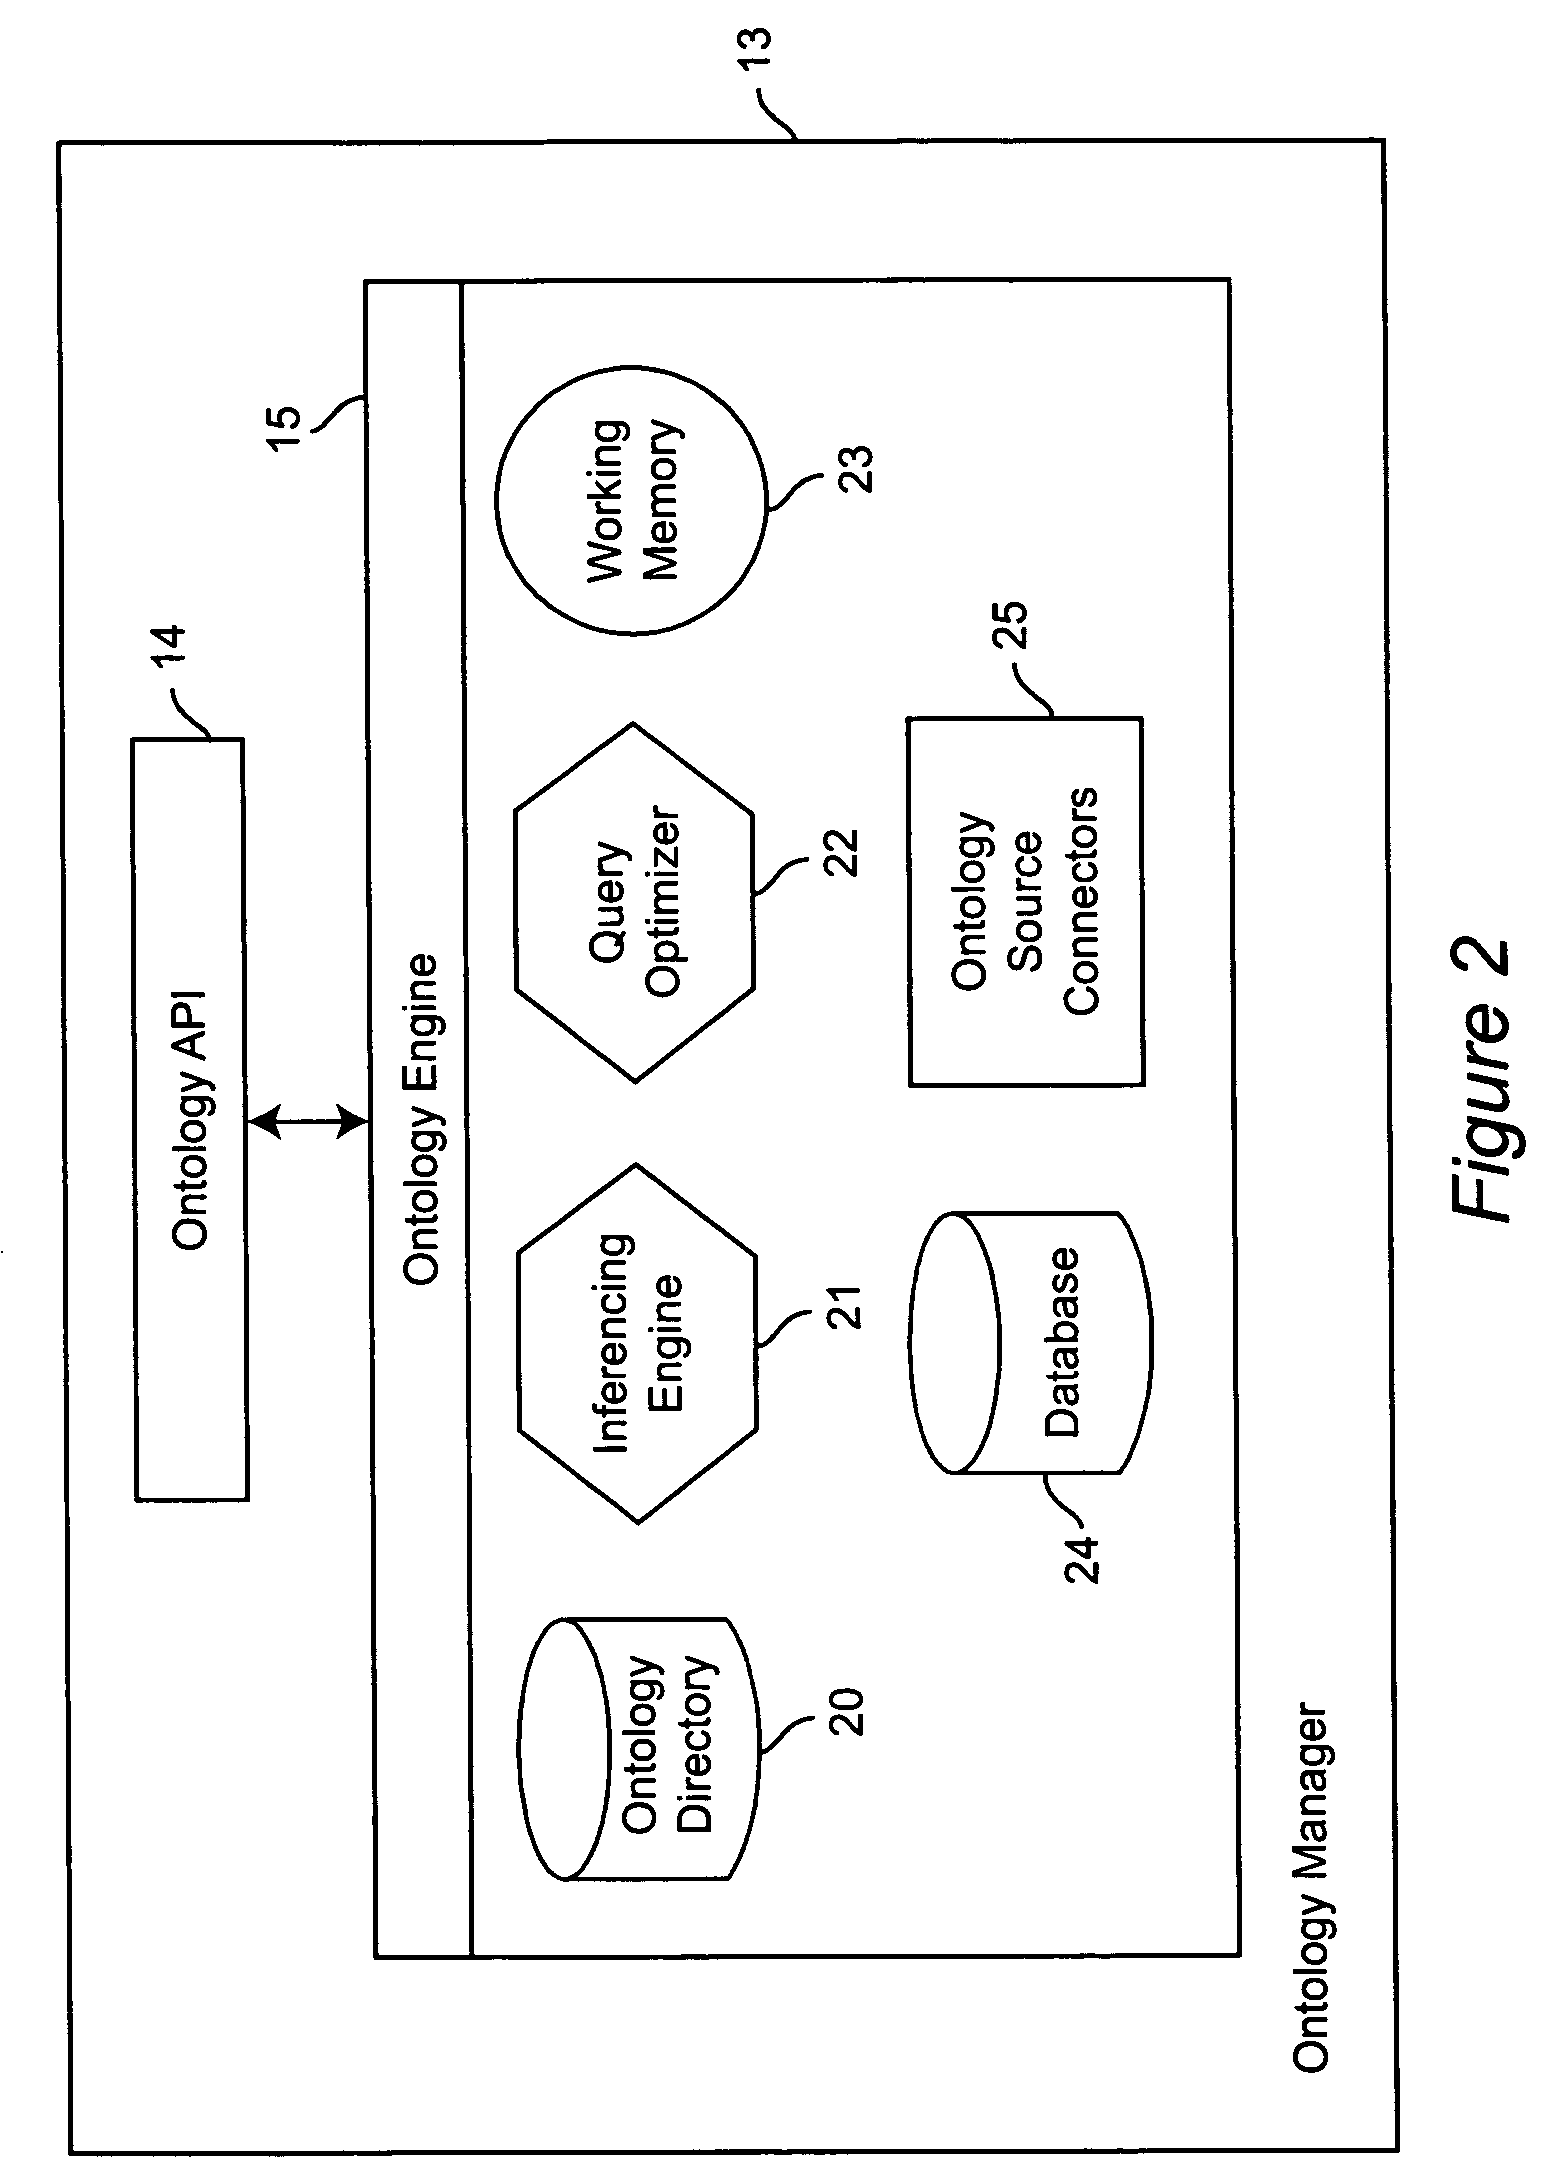 Apparatus and method for managing and inferencing contextural relationships accessed by the context engine to answer queries received from the application program interface, wherein ontology manager is operationally coupled with a working memory